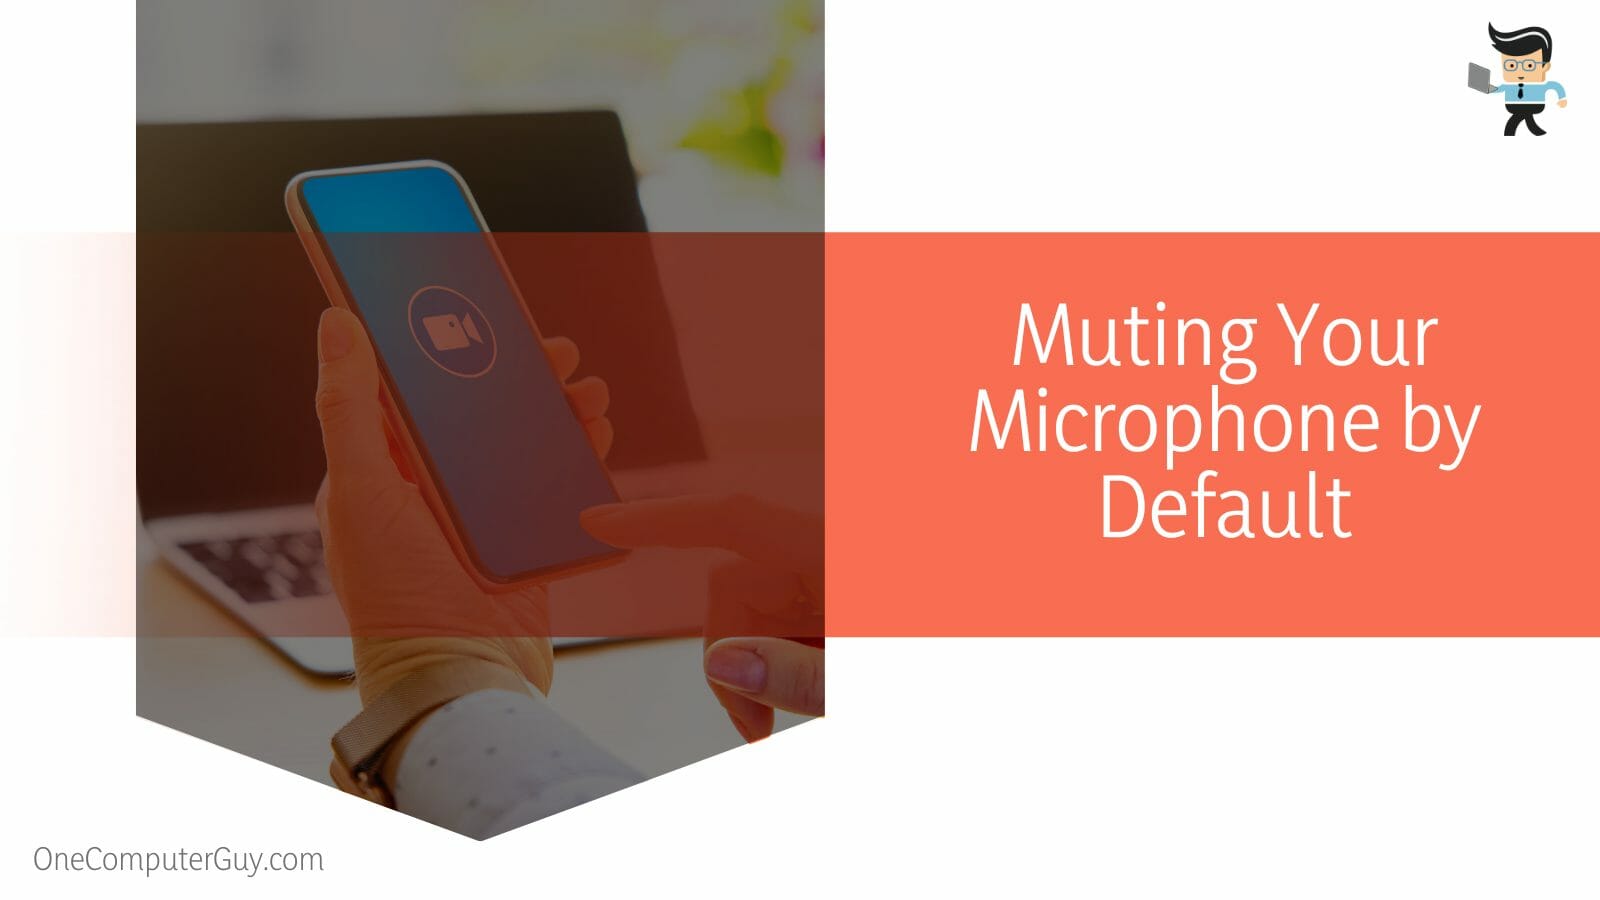 Muting Your Microphone by Default